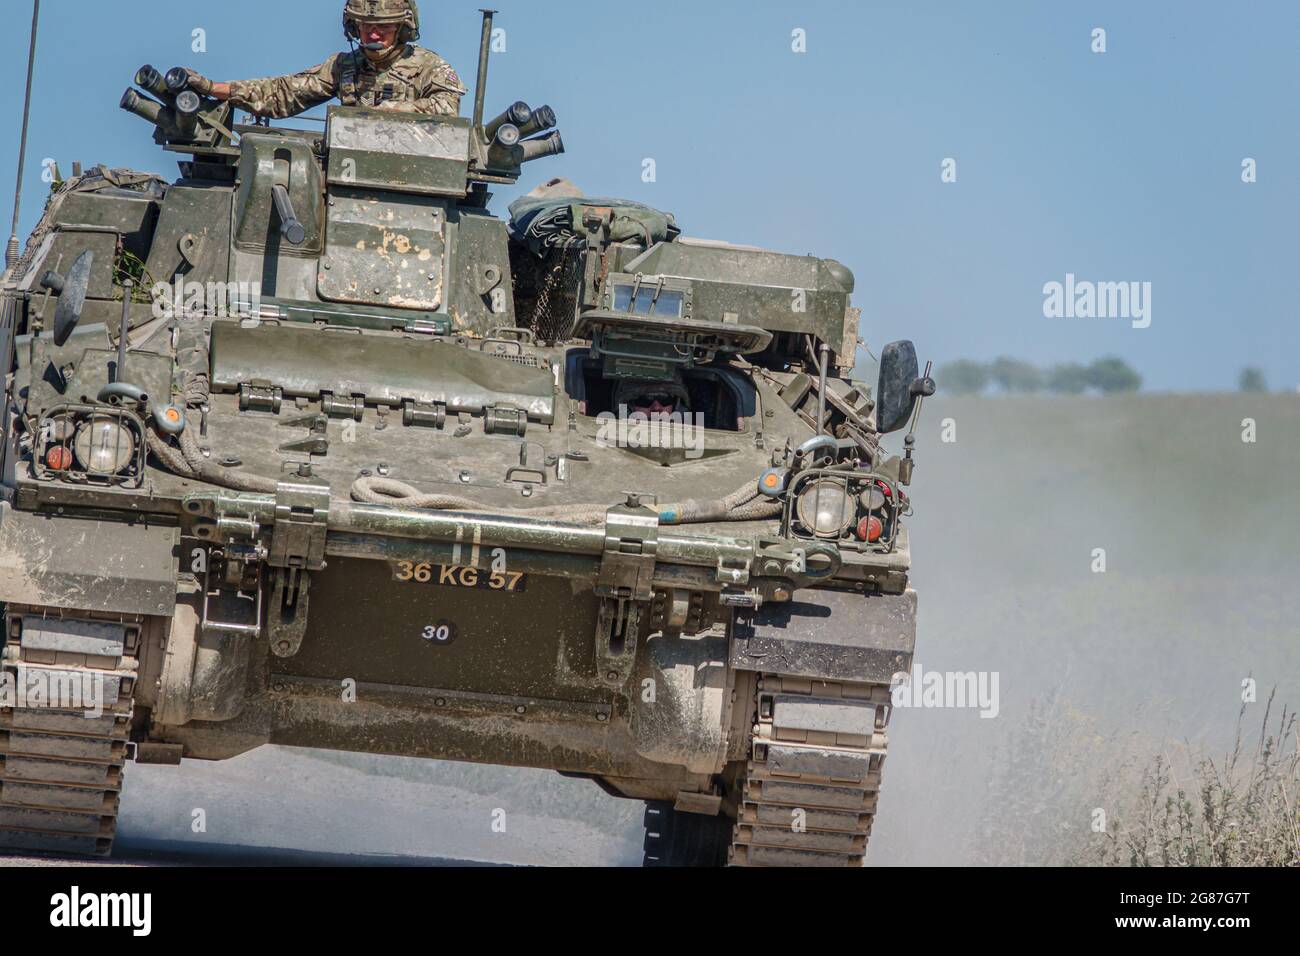 British army Warrior FV512 mechanised recovery vehicle tank in action on military exercise, Salisbury Plain, Wiltshire UK Stock Photo